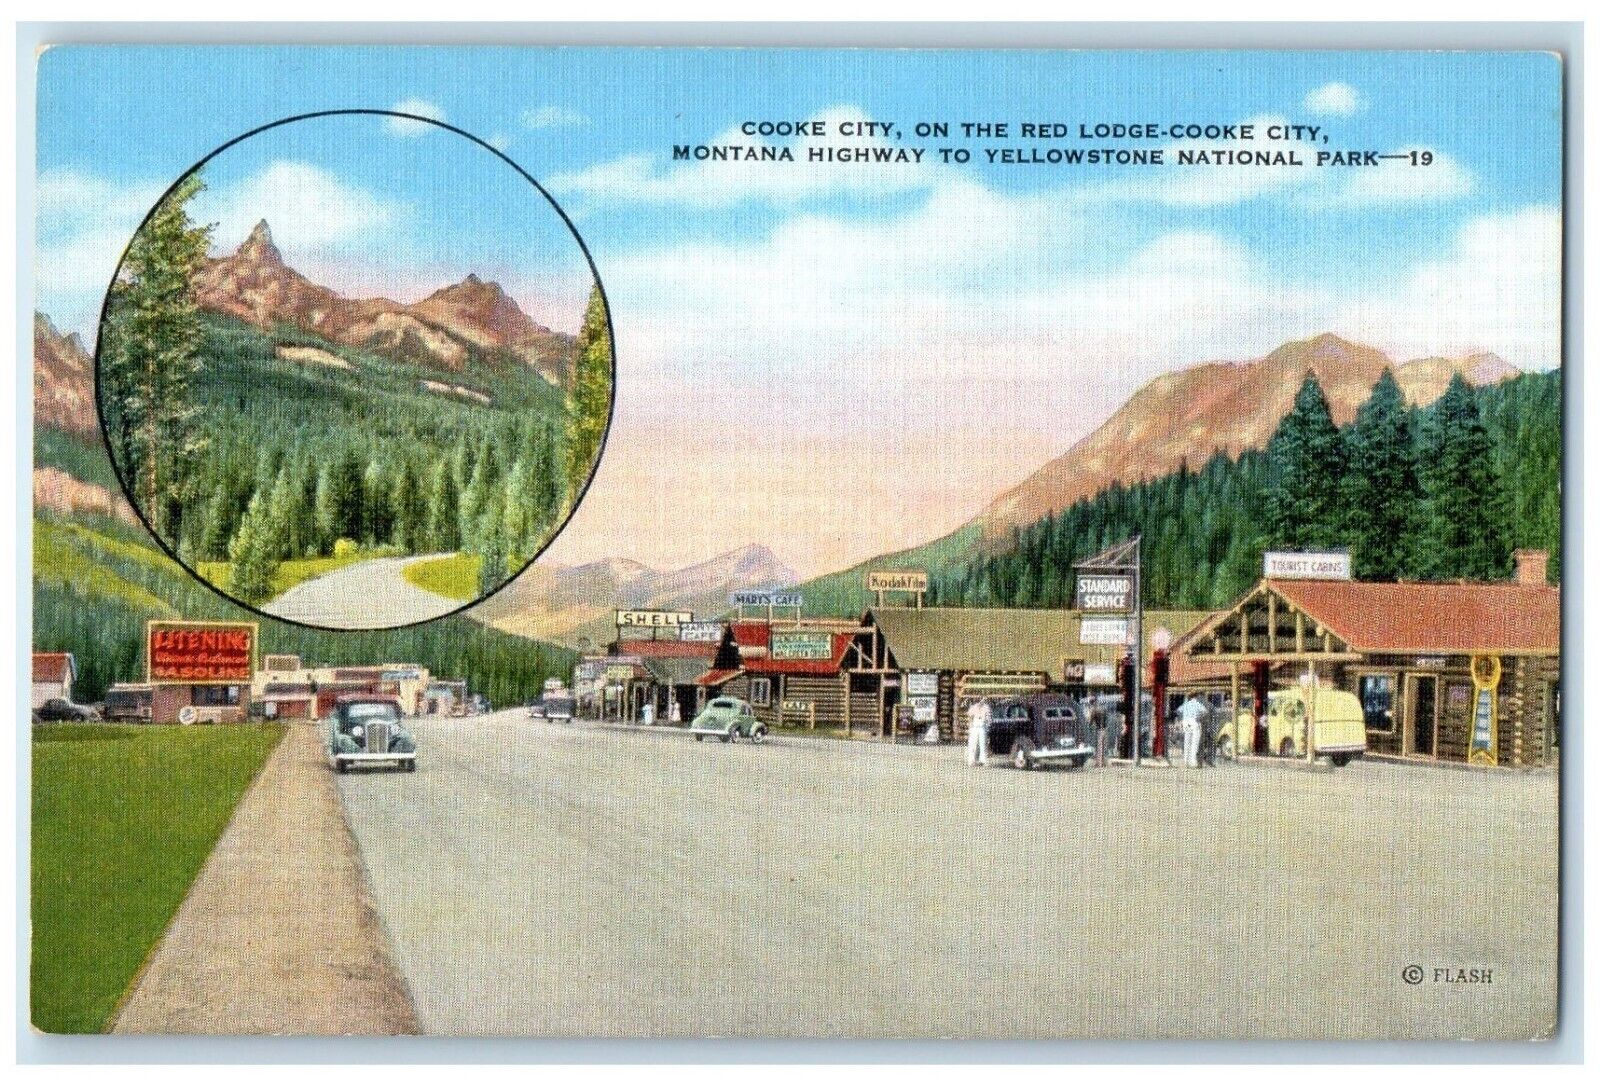 c1940 Cooke City Red Lodge-Cooke City Montana Yellowstone National Park Postcard